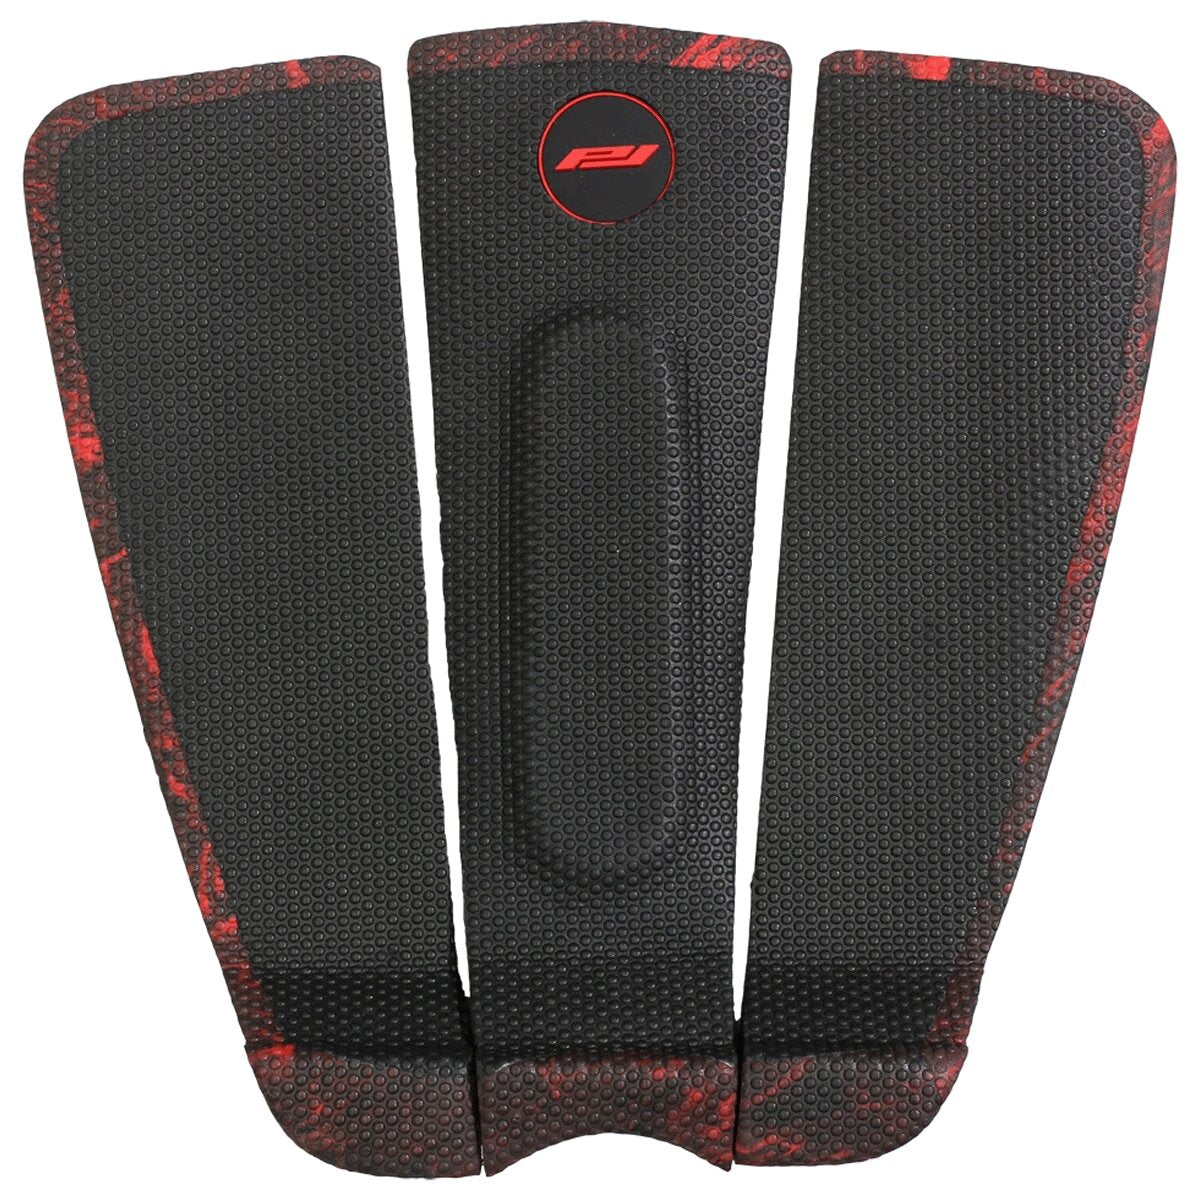 Pro-Lite Ethan Osborne Pro Traction Pad - Micro Dot Tail Black-Black and Red Marble-V2